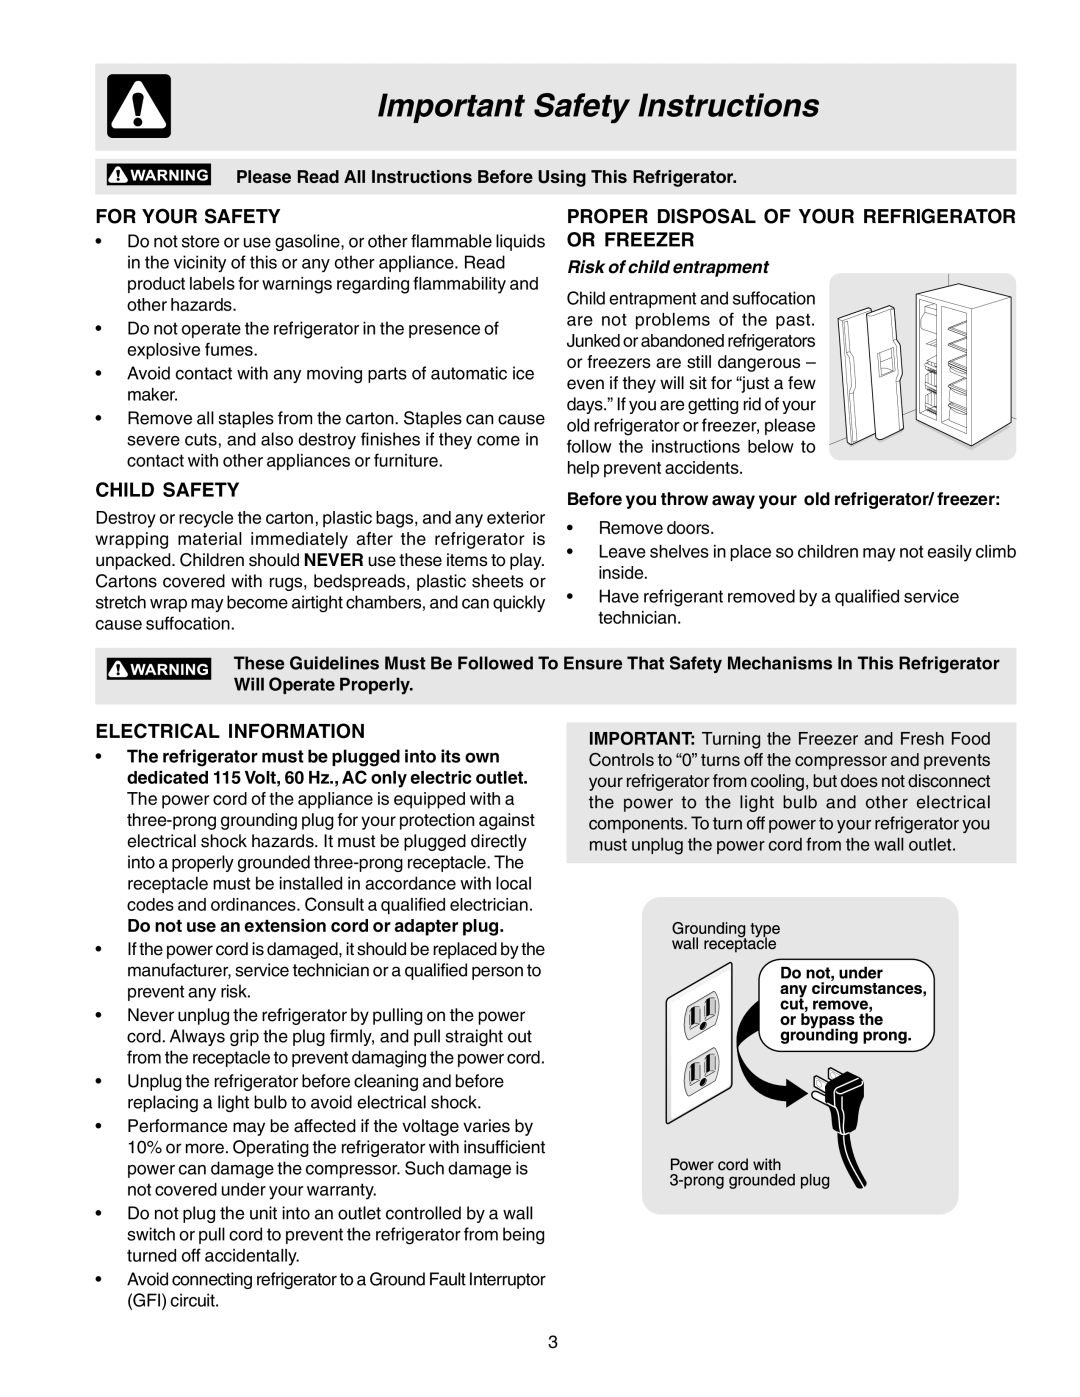 Frigidaire FRS23KR4AB7 Important Safety Instructions, For Your Safety, Proper Disposal Of Your Refrigerator Or Freezer 